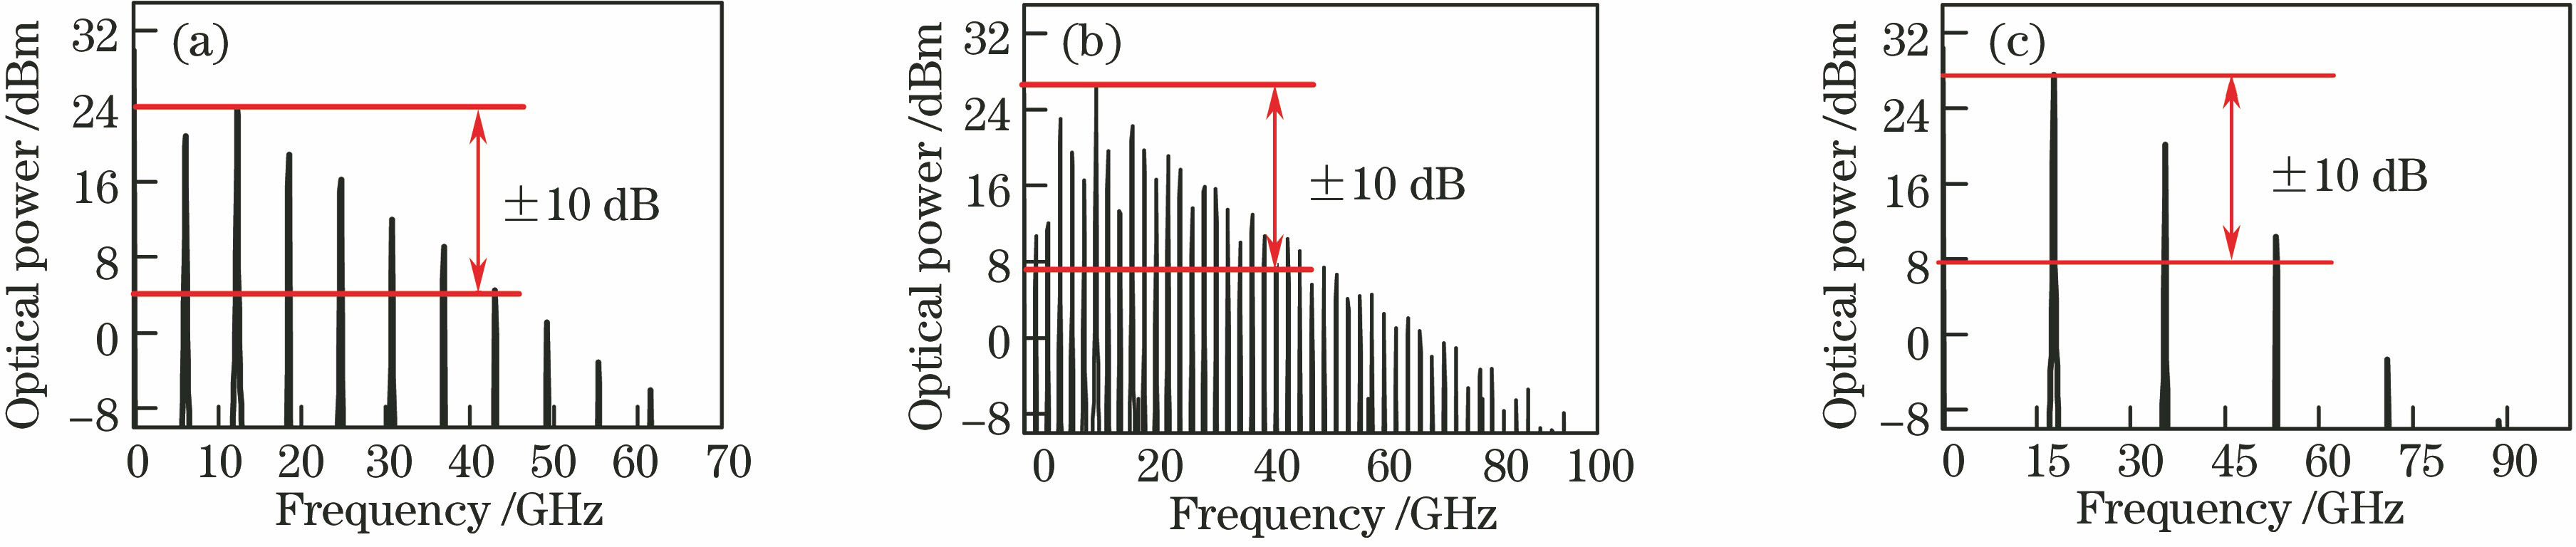 Output power spectra of SL1 under different injection strengths at frequency detuning of 10 GHz. (a) ξi=0.03; (b) ξi=0.047; (c) ξi=0.1